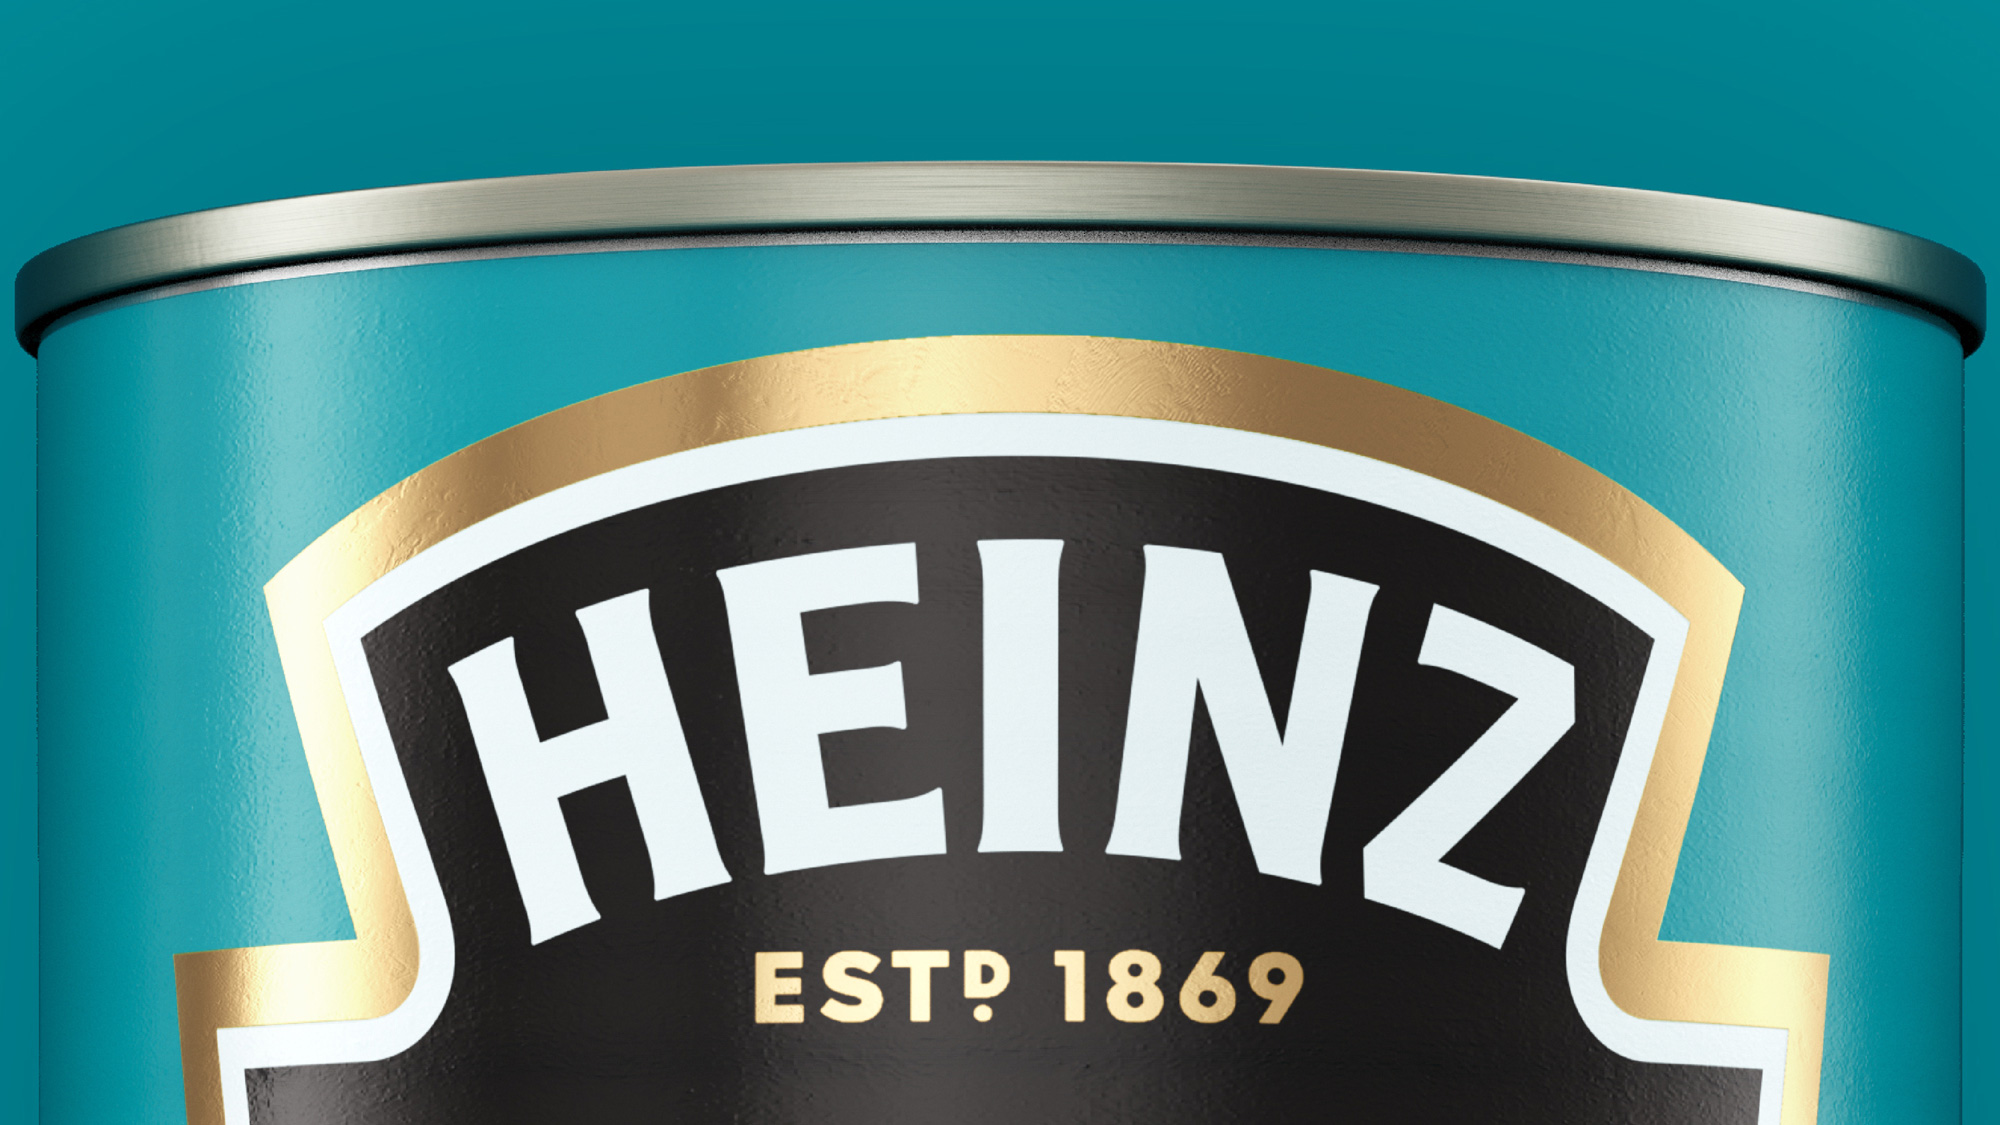 New Master Brand for Heinz by Jones Knowles Ritchie